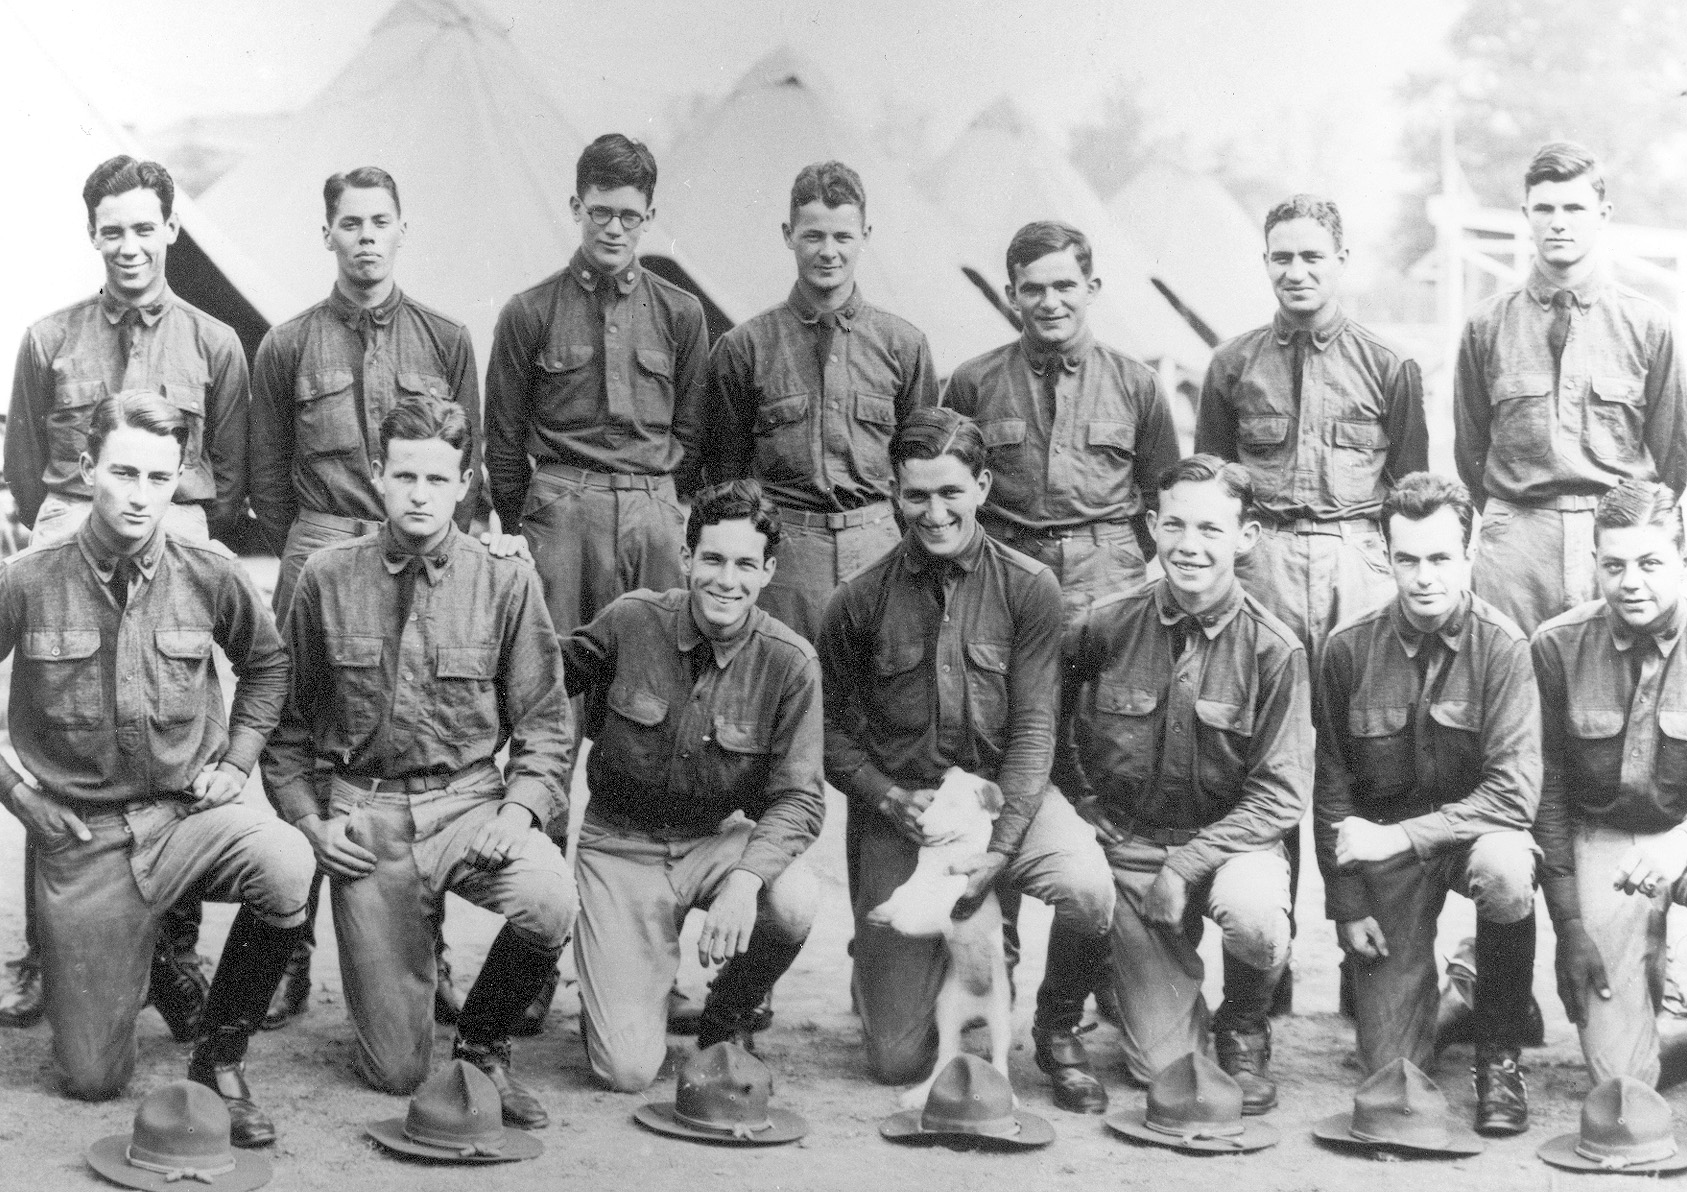 A group of cadets at Fort Myer includes Pulliam (fourth from left) and Shell (first on right) in the back row, and Roberts in the front row holding the dog.